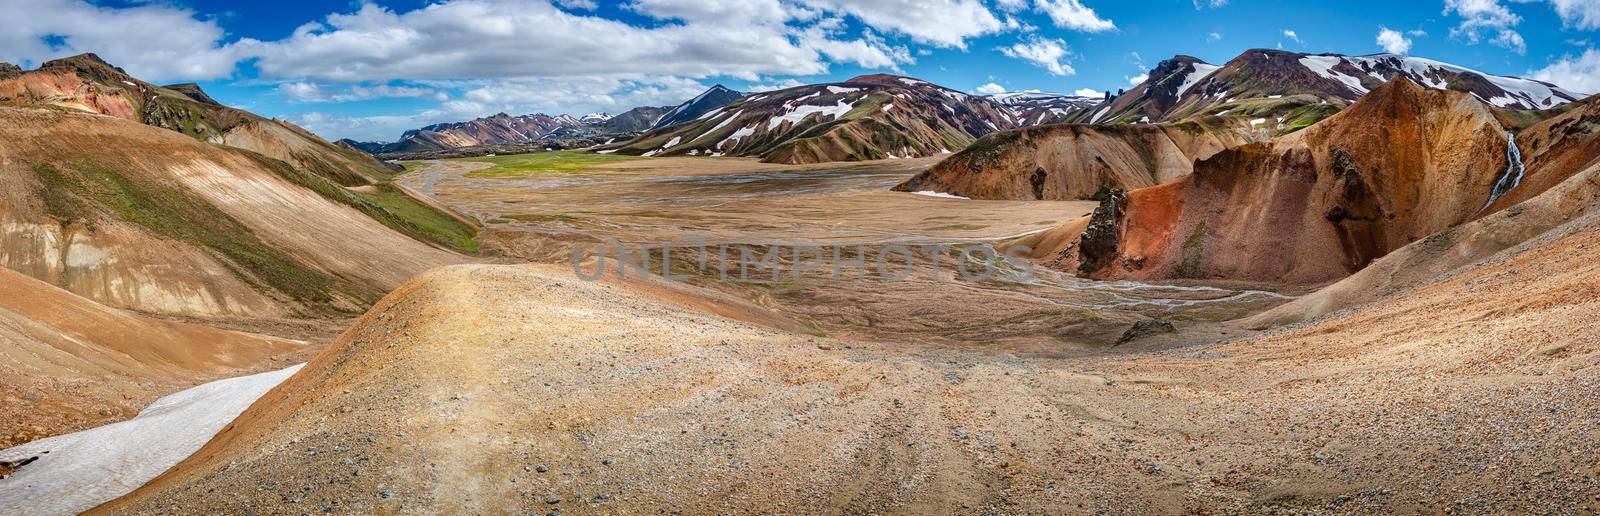 Panoramic true Icelandic landscape view of colorful rainbow volcanic Landmannalaugar mountains, volcanoes, valleys and famous Laugavegur hiking trail at blue sky, Iceland